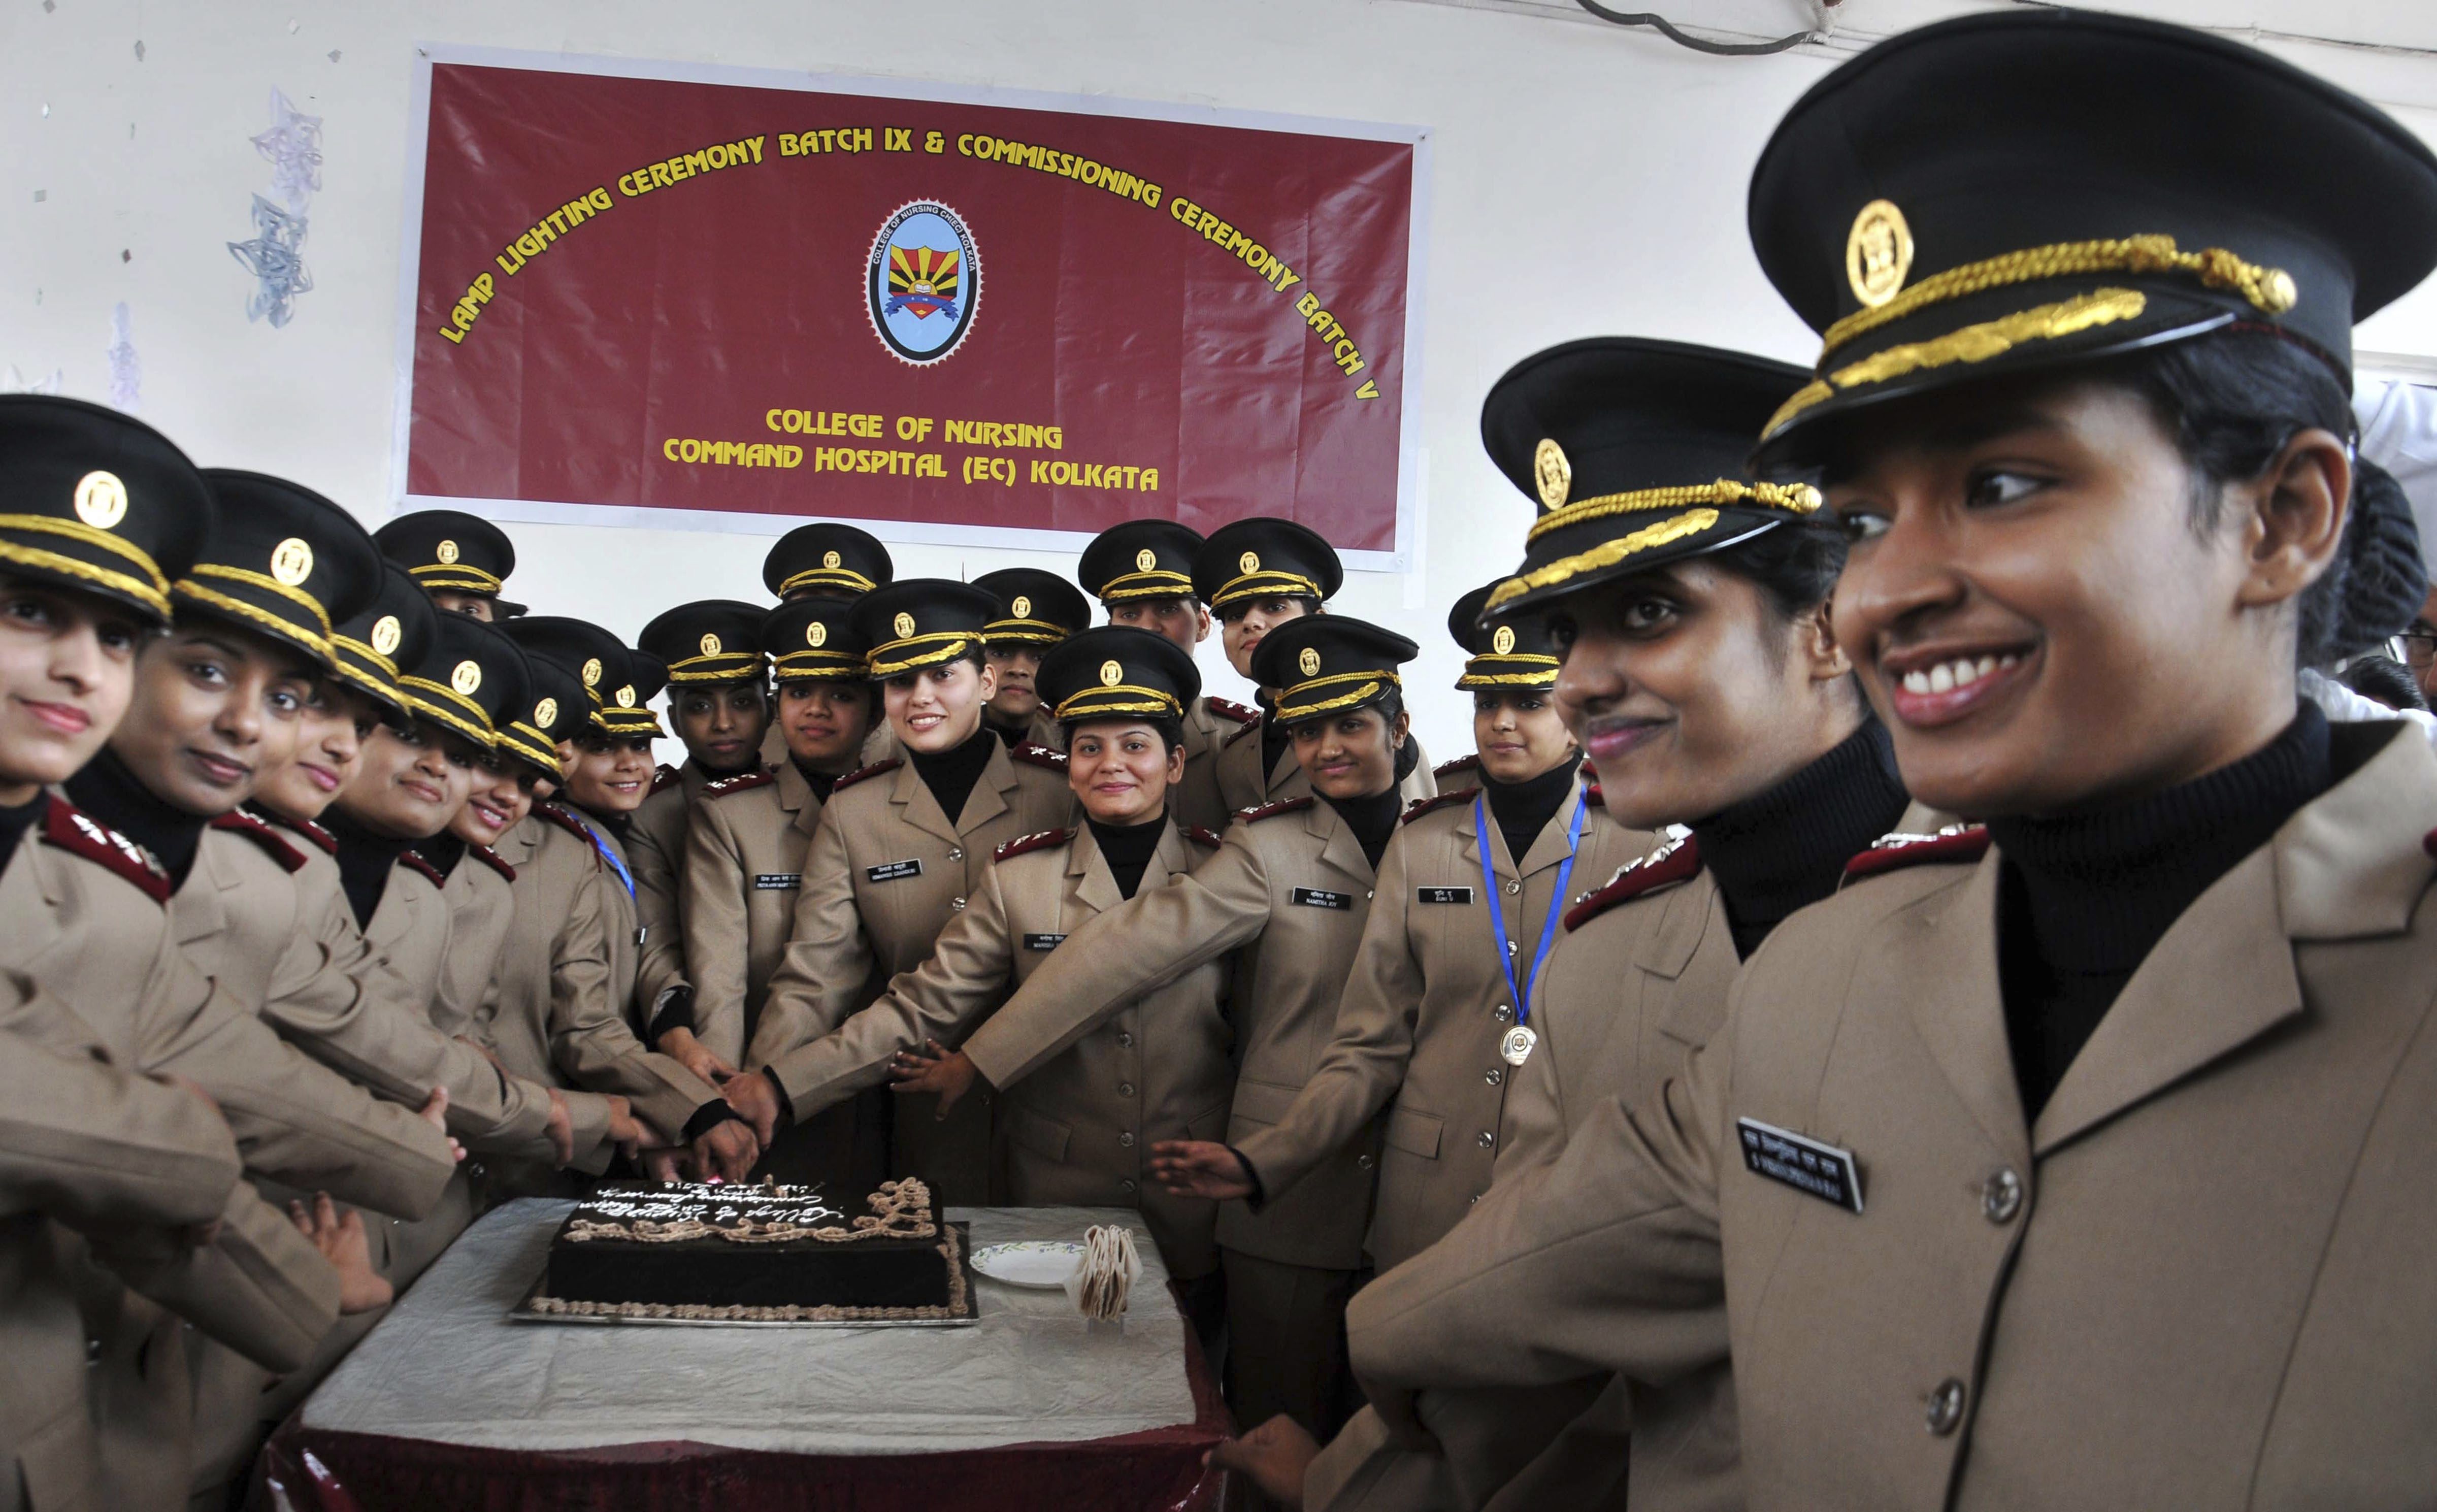 Military Nursing cadets celebrate after their Commissioning ceremony, at Command Hospital (Eastern Command), in Kolkata - PTI